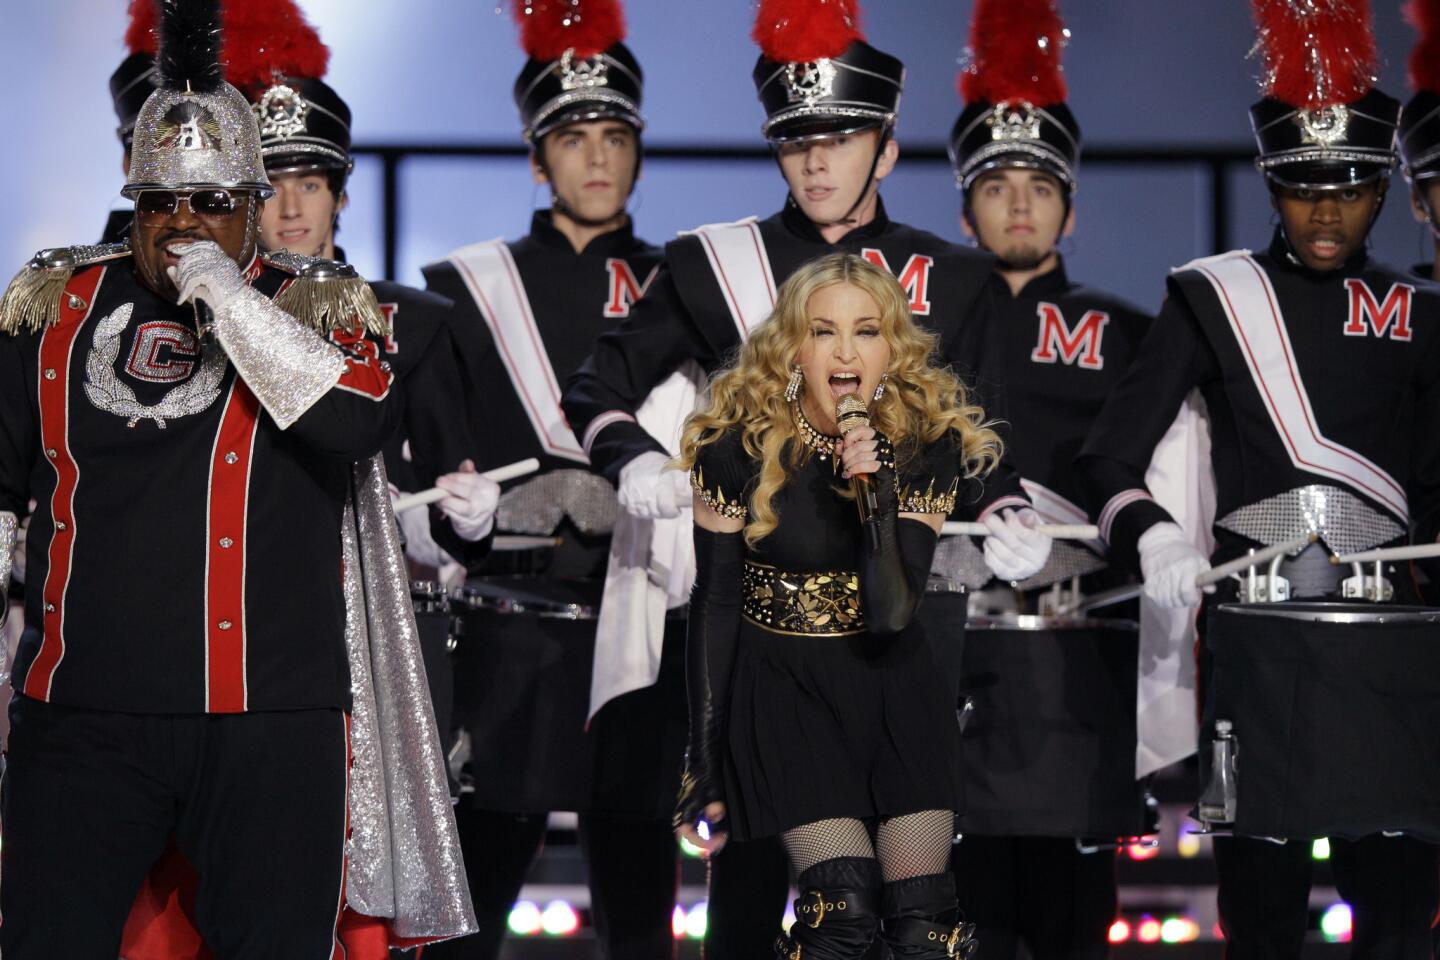 In less than 10 minutes, America watched marching warriors pulling a massive chariot; faux trumpeters announcing the arrival of Madonna; LMFAO, Nicki Minaj, M.I.A. and Cee Lo Green make cameos; several drum lines. Touchdown! Madonna kept 114 million viewers glued to their seats.